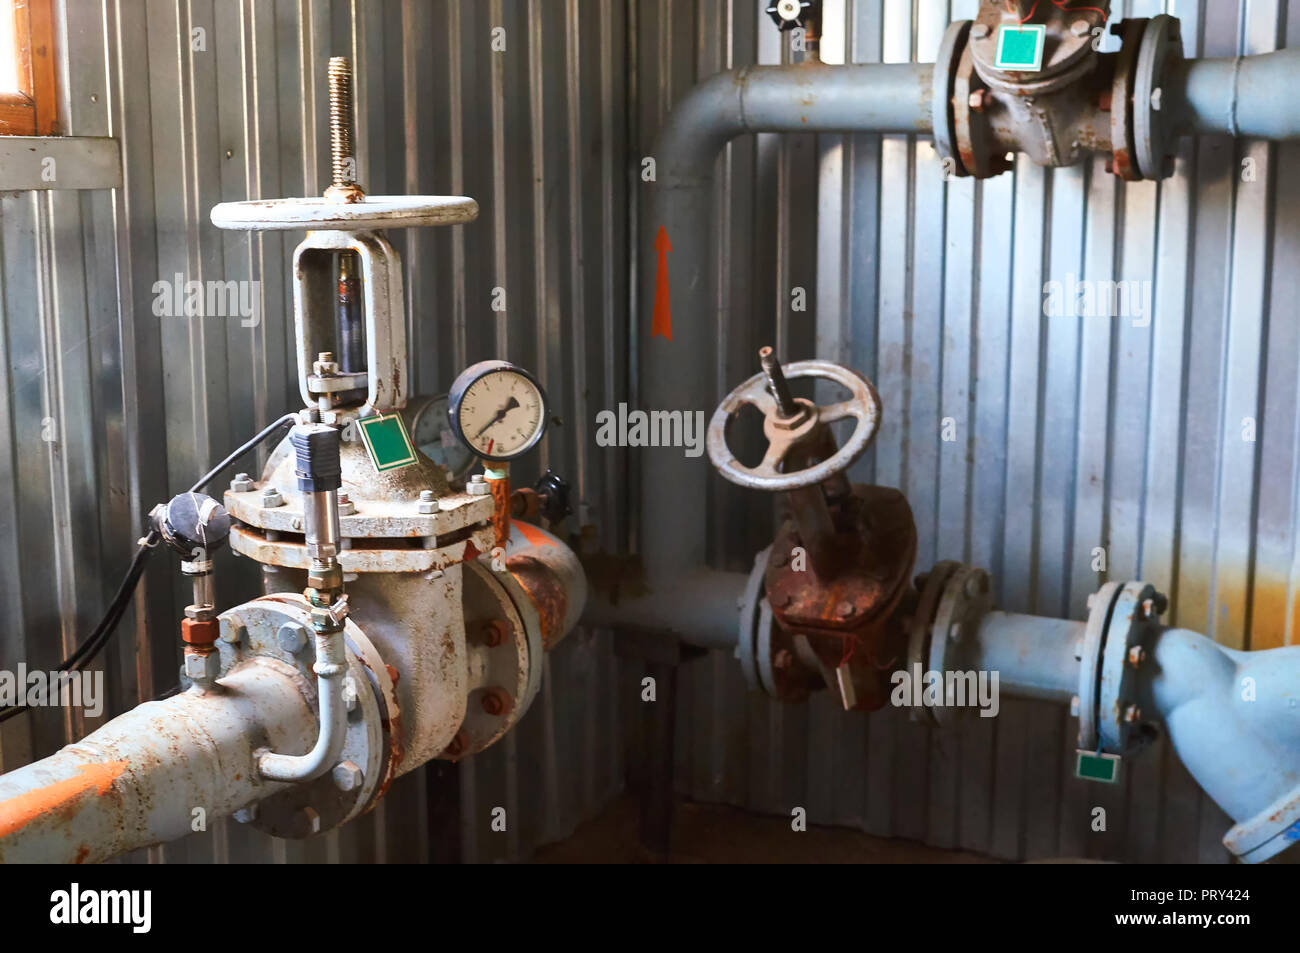 Several old valves on the cold water pipeline. Industrial background. Stock Photo